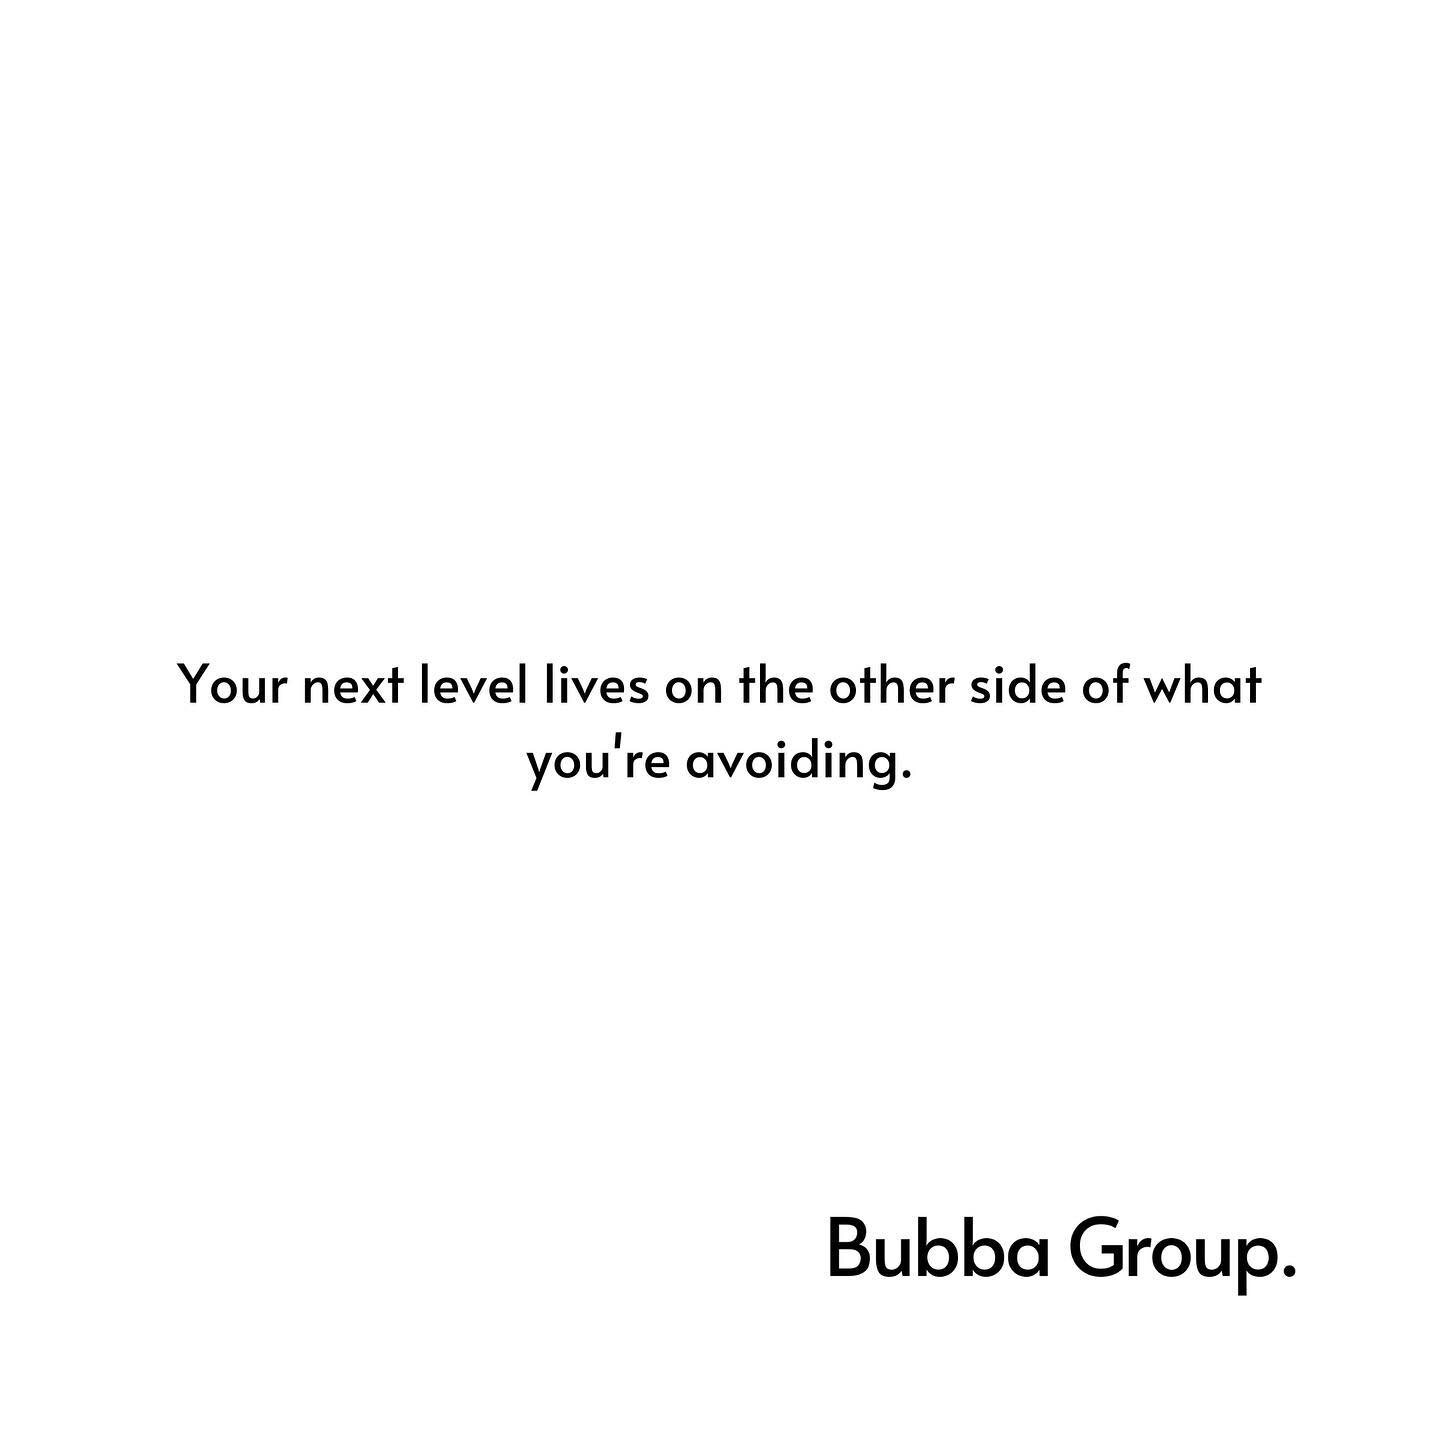 Your next level lives on the other side of what you're avoiding.

#bubbagroup #winnersculture